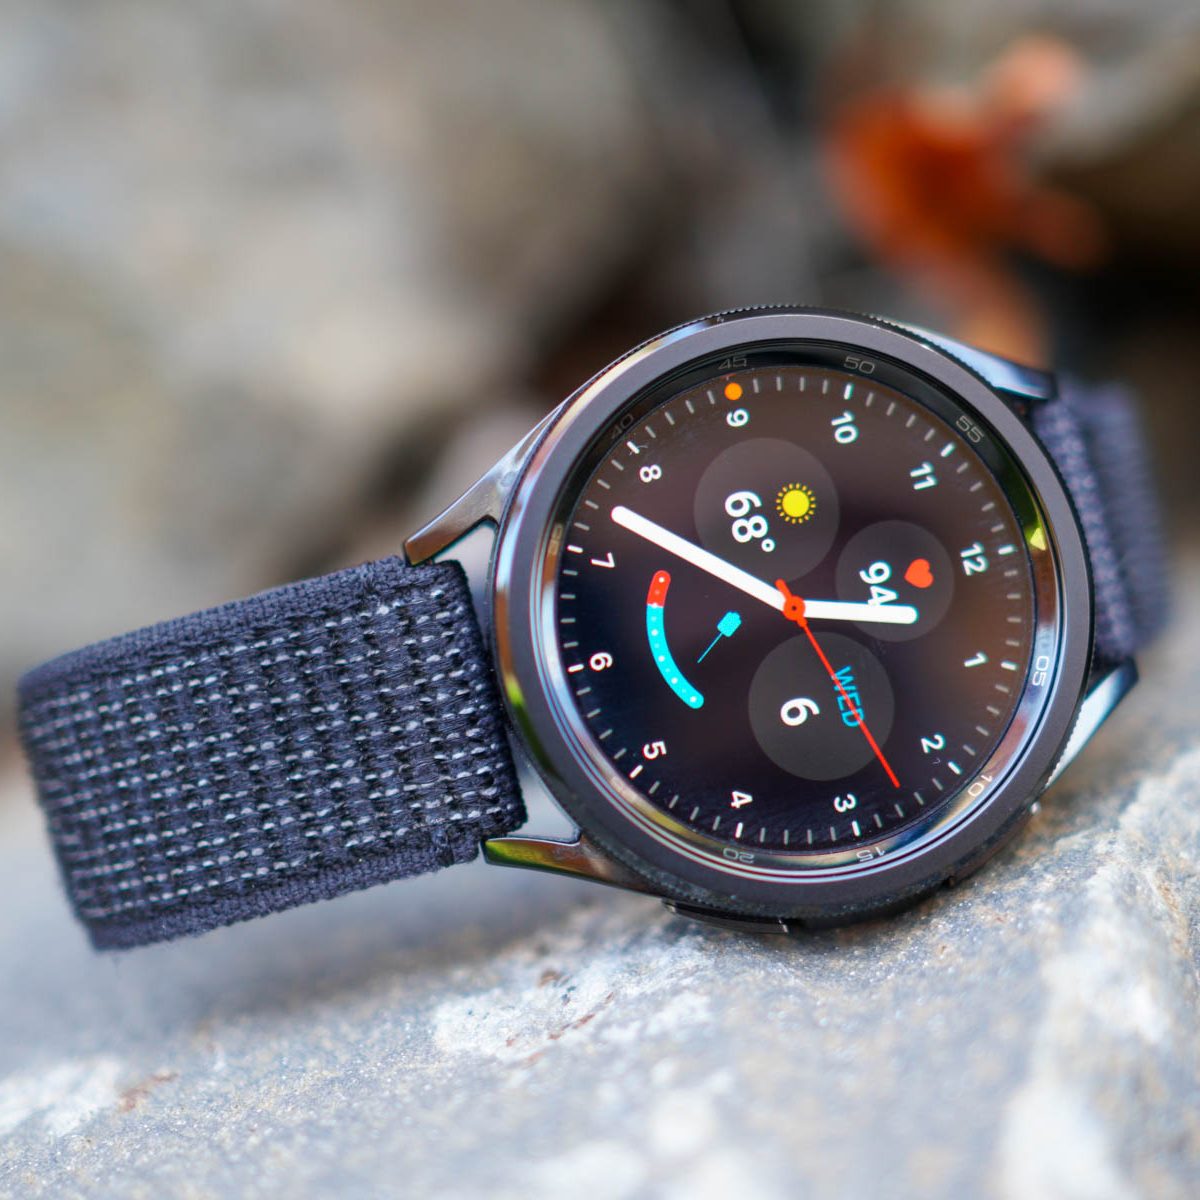 Samsung Galaxy Watch 6 and Watch 6 Classic Review: Notable Upgrades